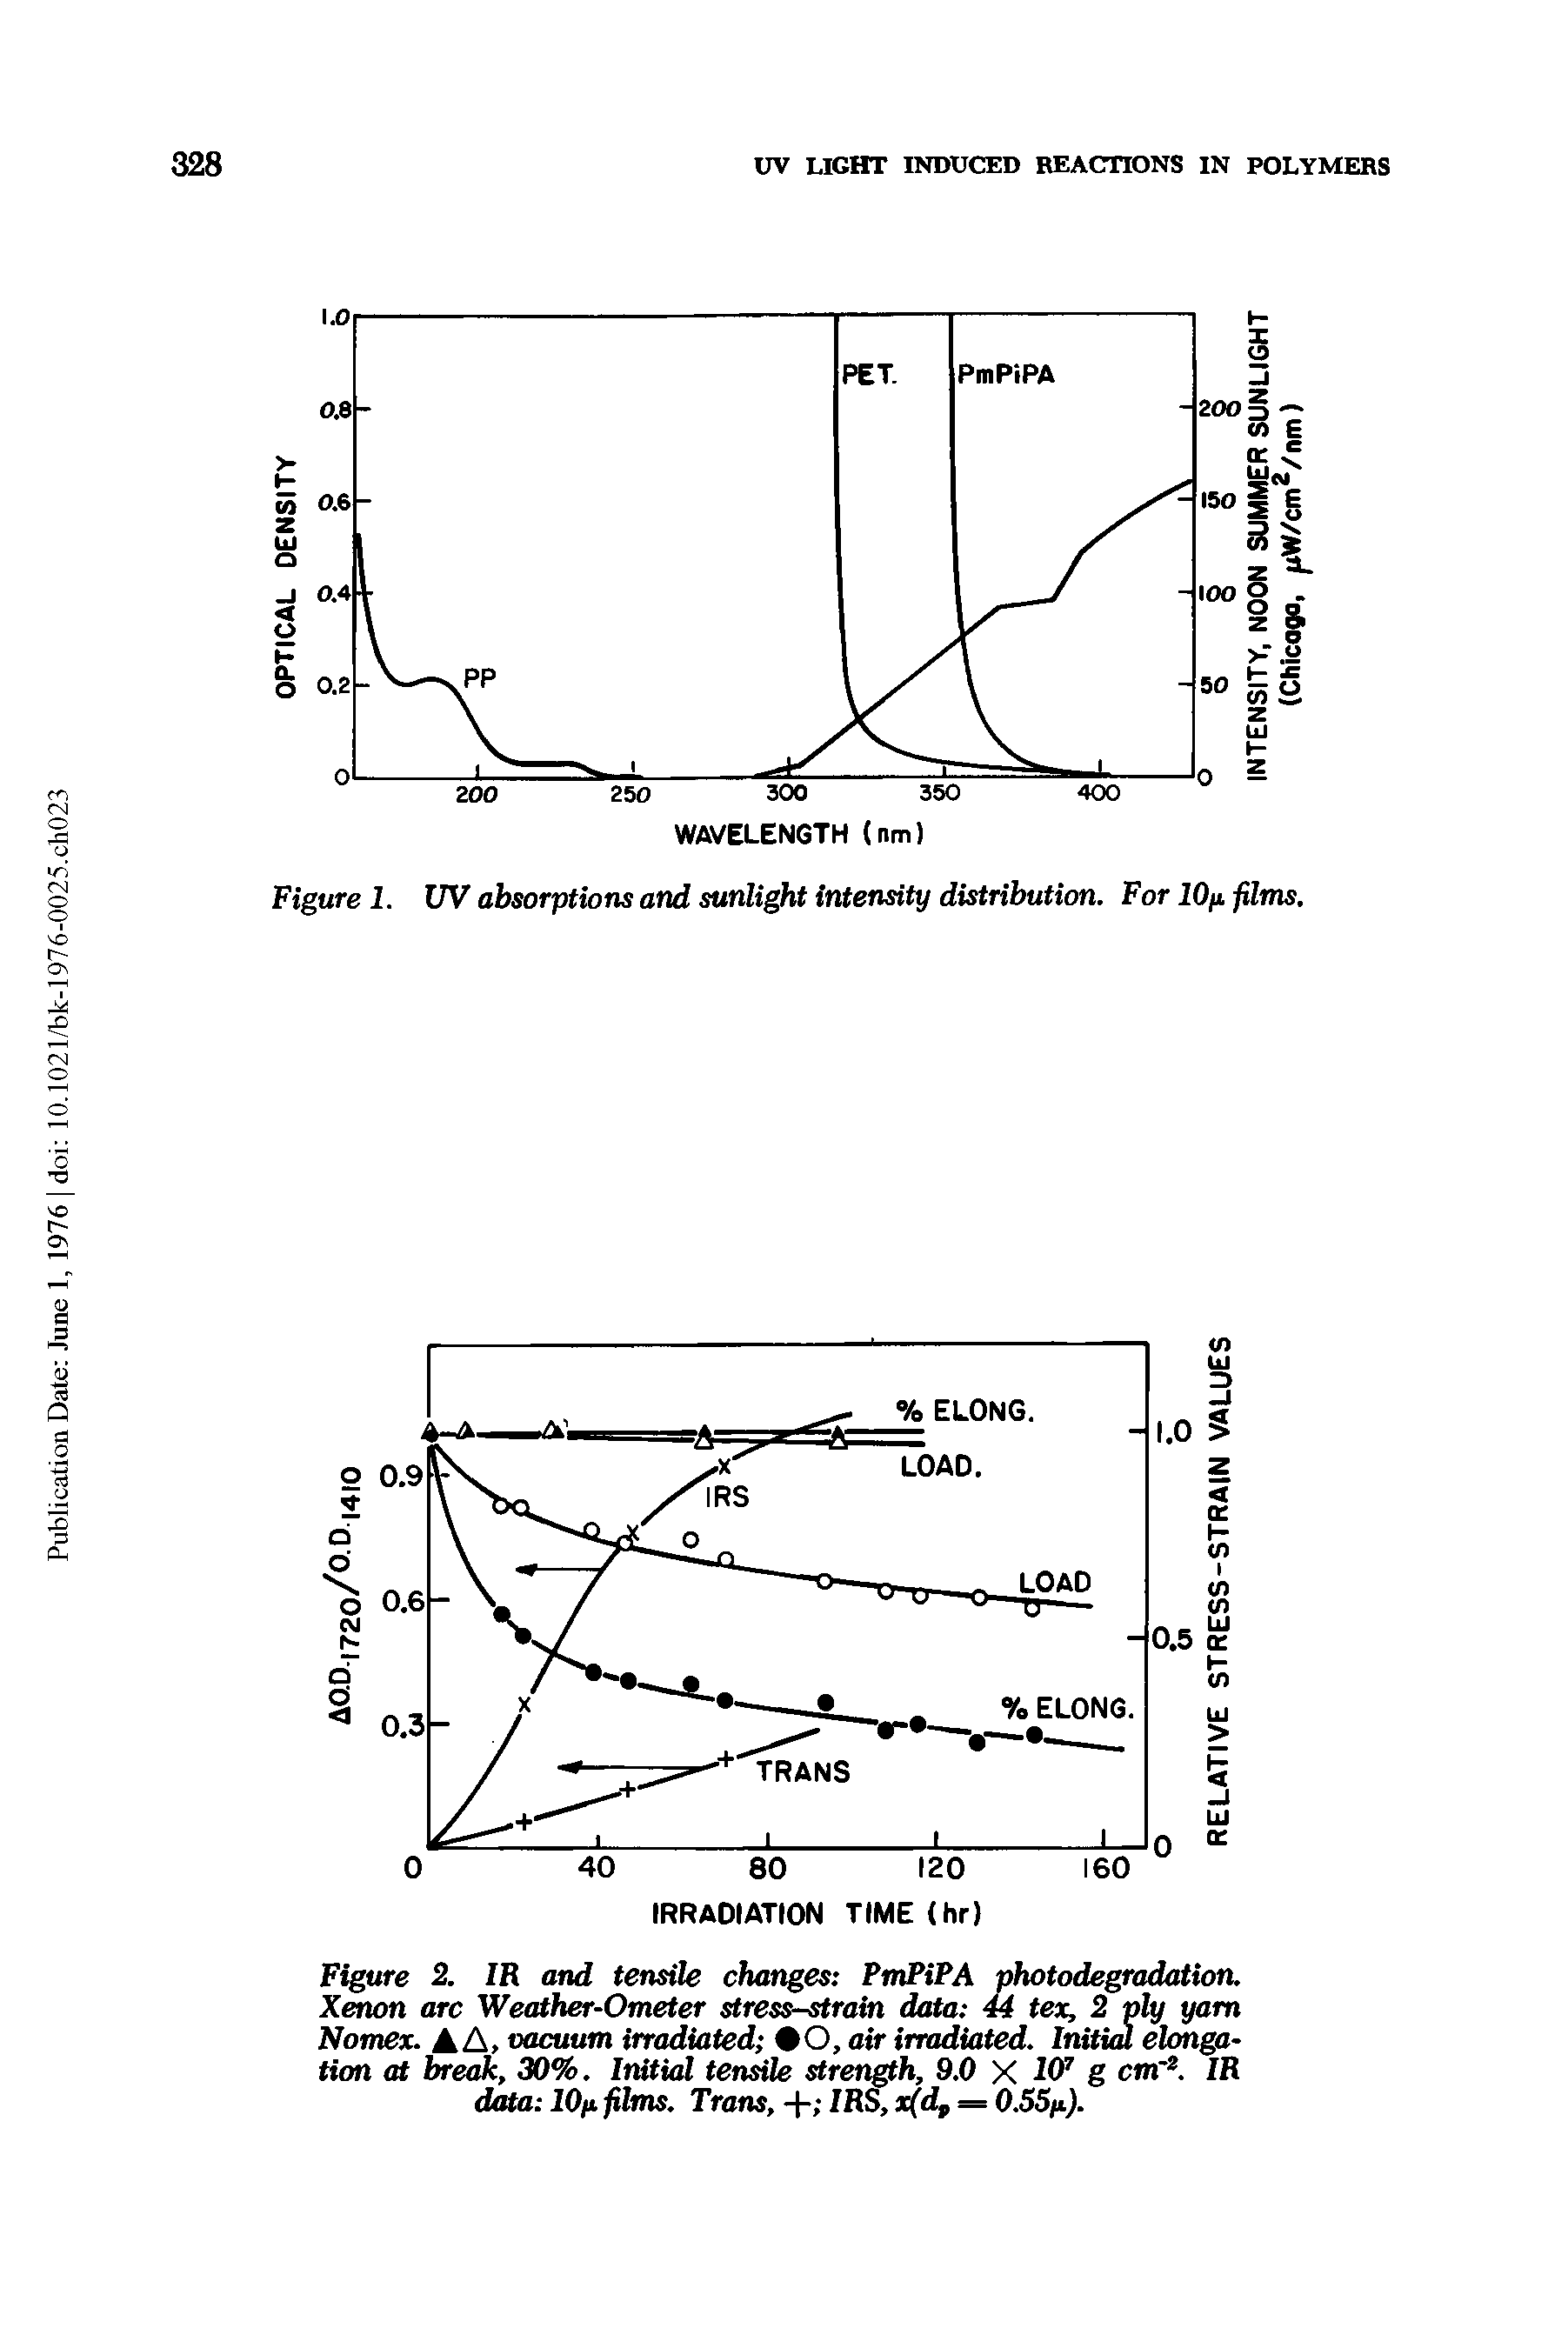 Figure 2. IR and tensile changes PmPiPA photodegradation. Xenon arc Weather-Ometer stress-strain data 44 tex, 2 ply yam Nomex. A A> vacuum irradiated 0, air irradiated. Initial elmga-Hon at break, 30%, Initial tensile strength, 9,0 X 10" g cmr, IR data lOfi films, Trans, + IRS, x(dp = 0.55/ij.